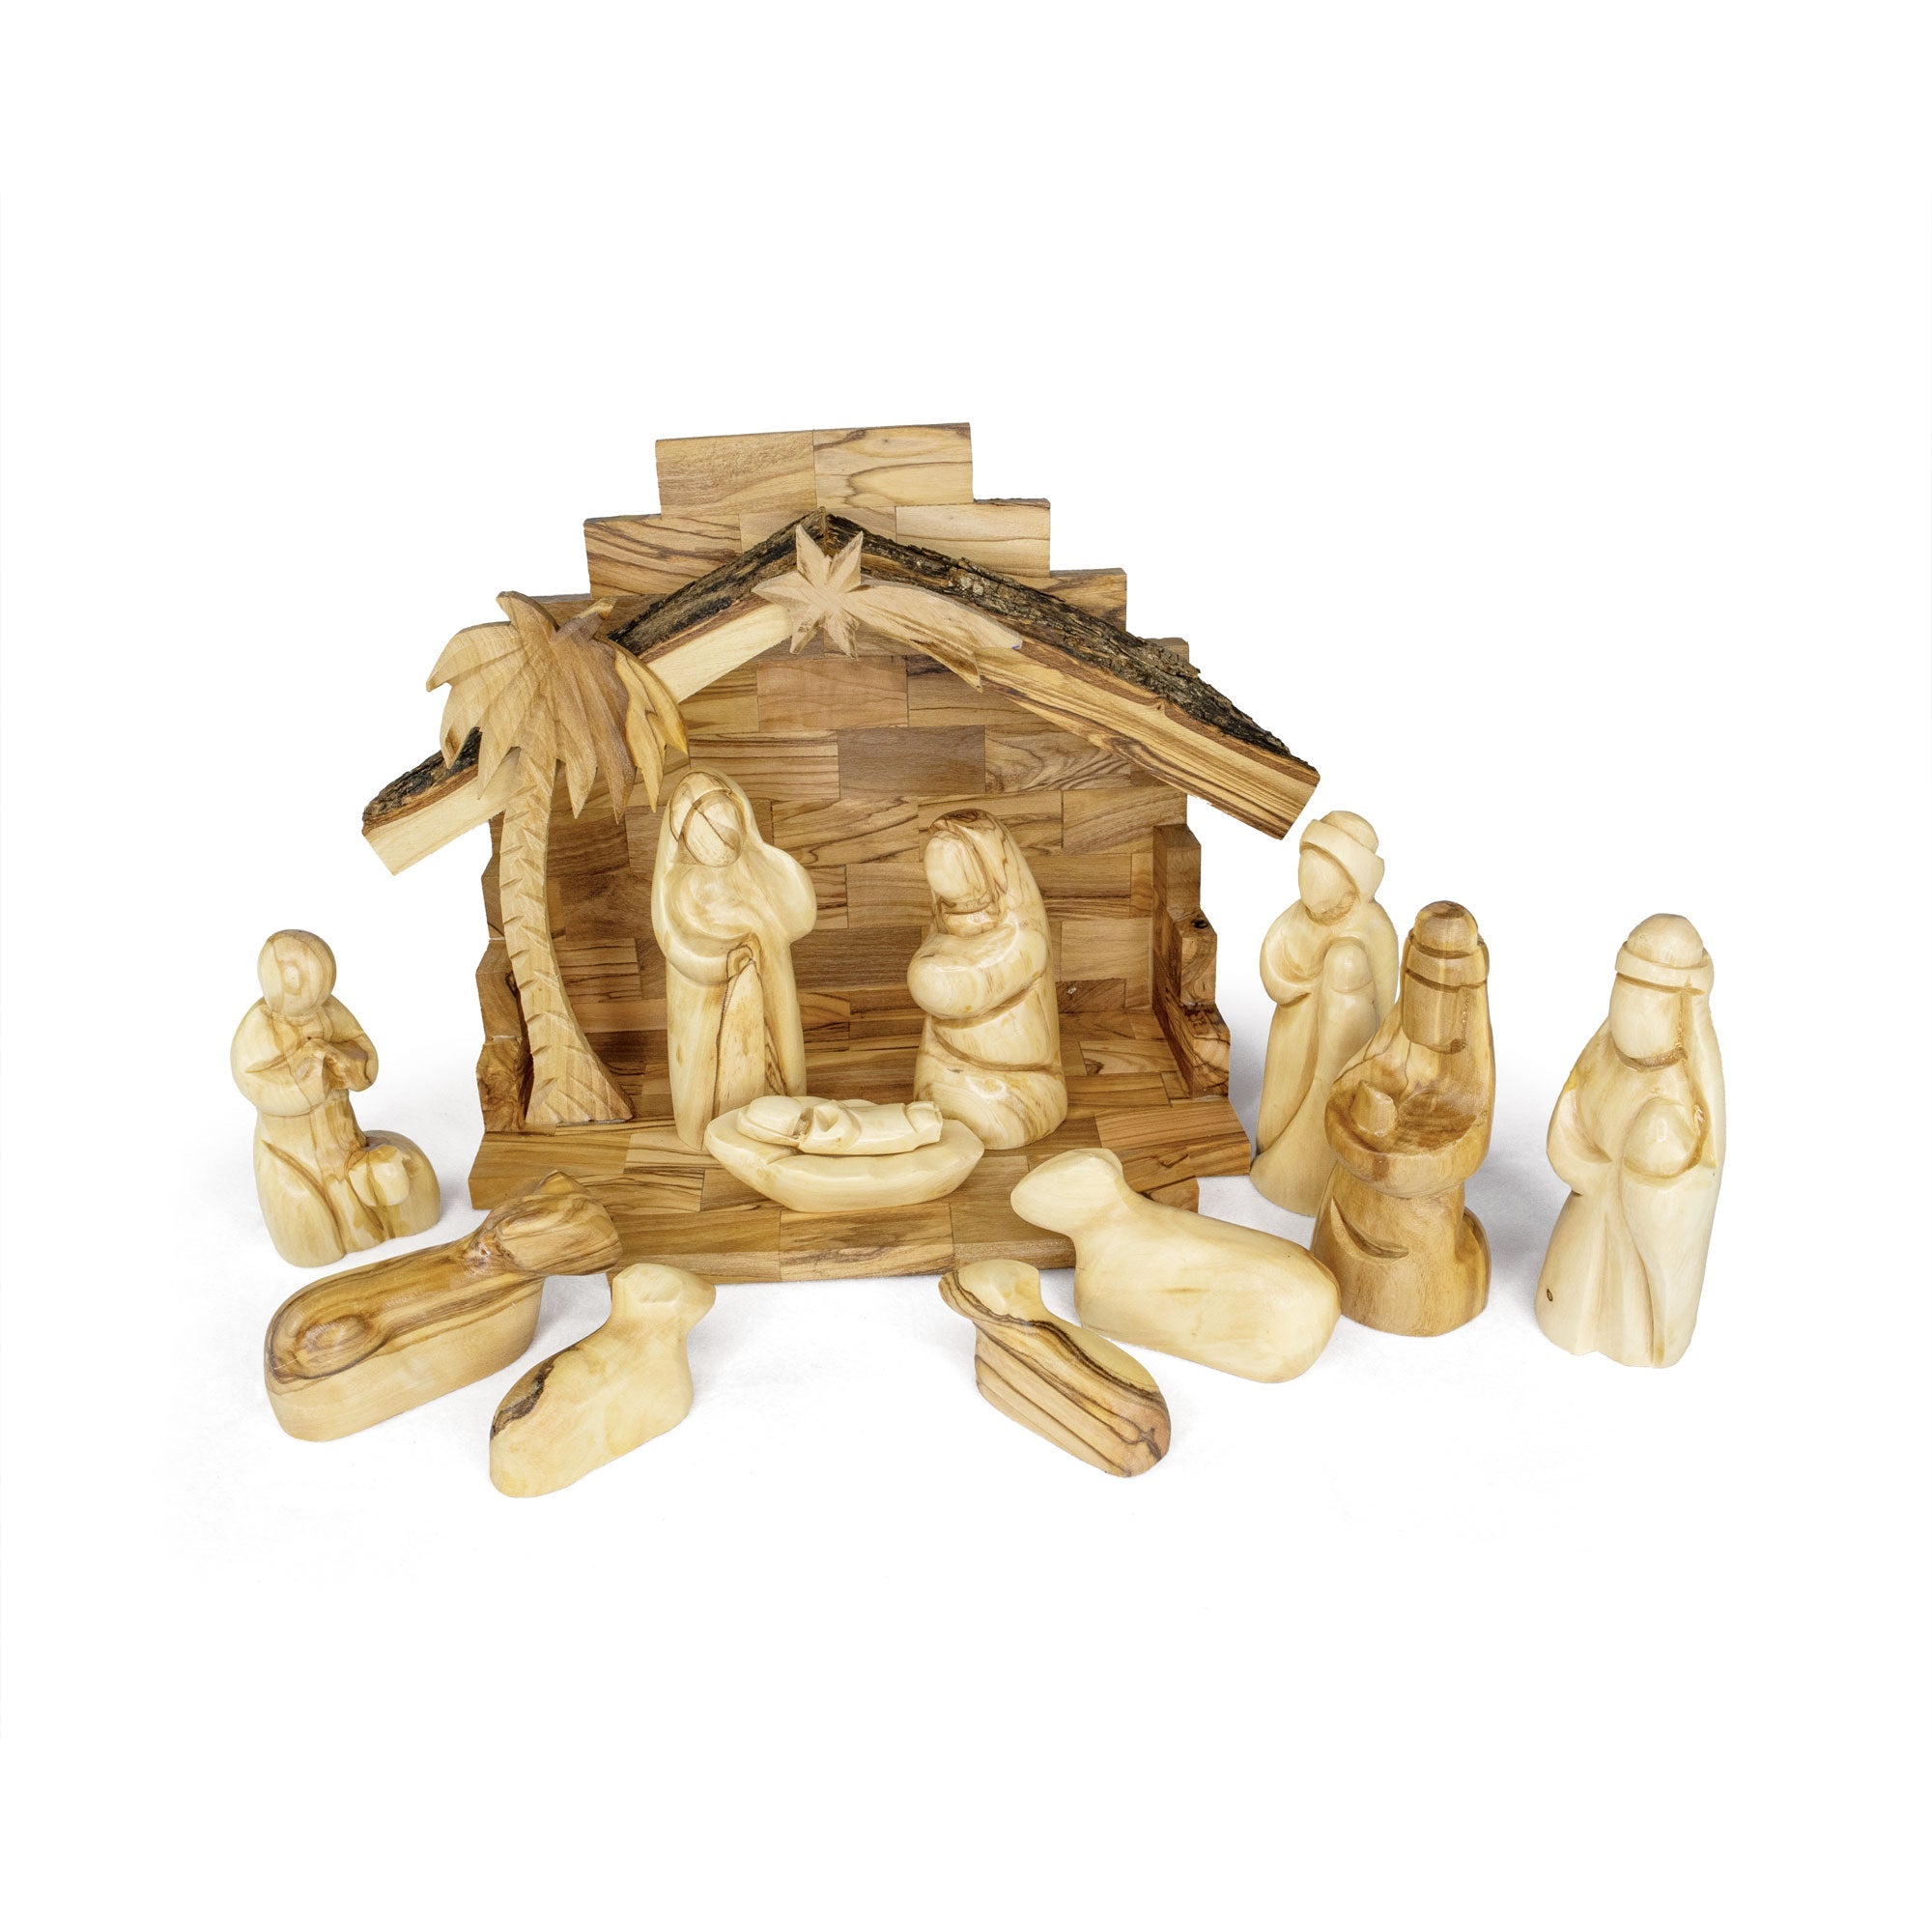 Holy Land Olive Wood Nativity with Small Bark Roof Stable and Small Faceless Figurines